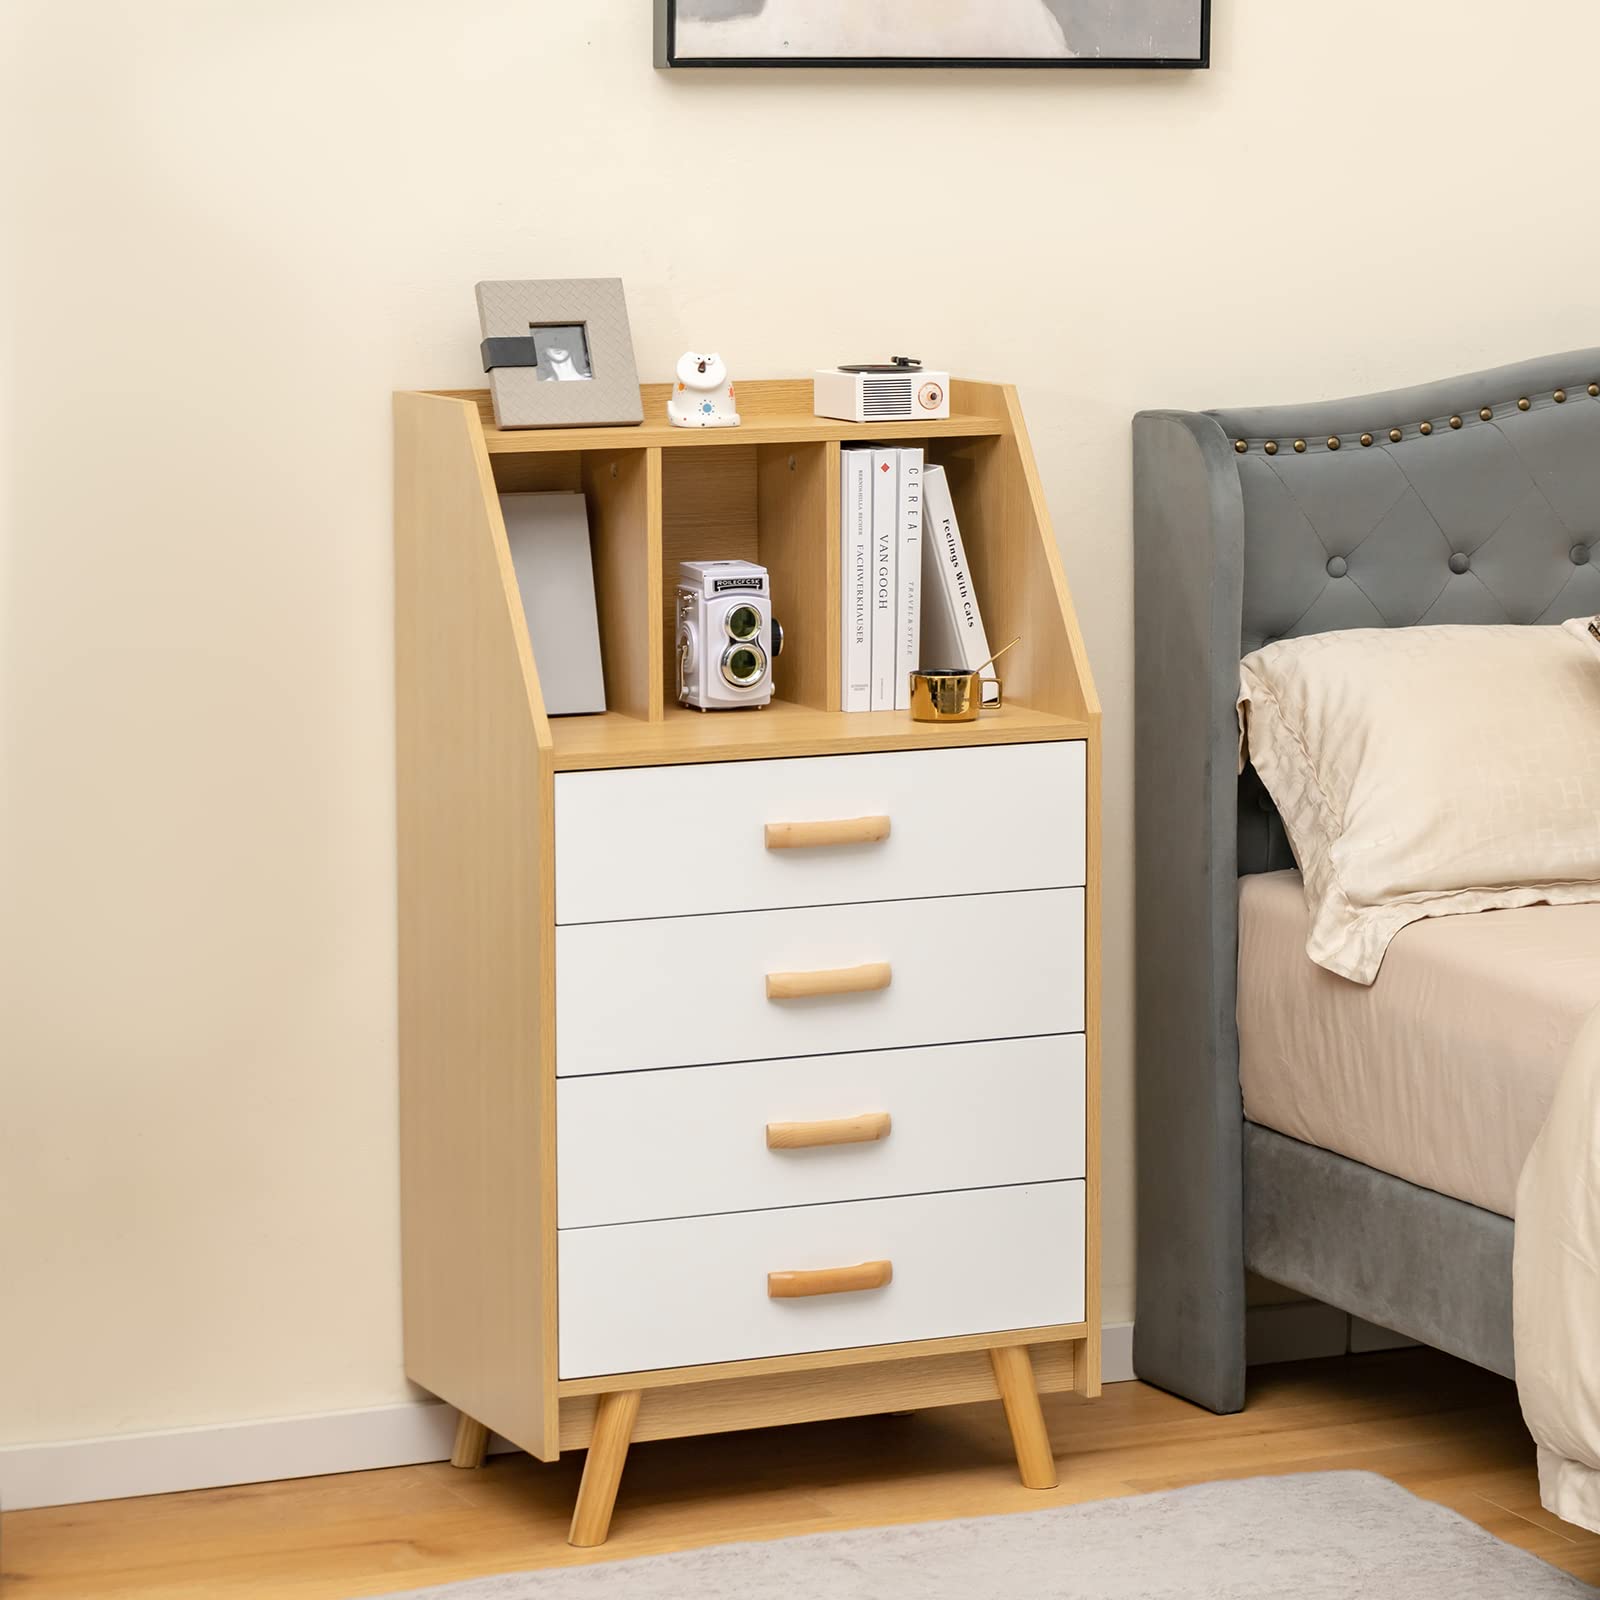 Giantex 4-Drawer Dresser Storage Cabinet - Freestanding Chest of Drawers with Countertop